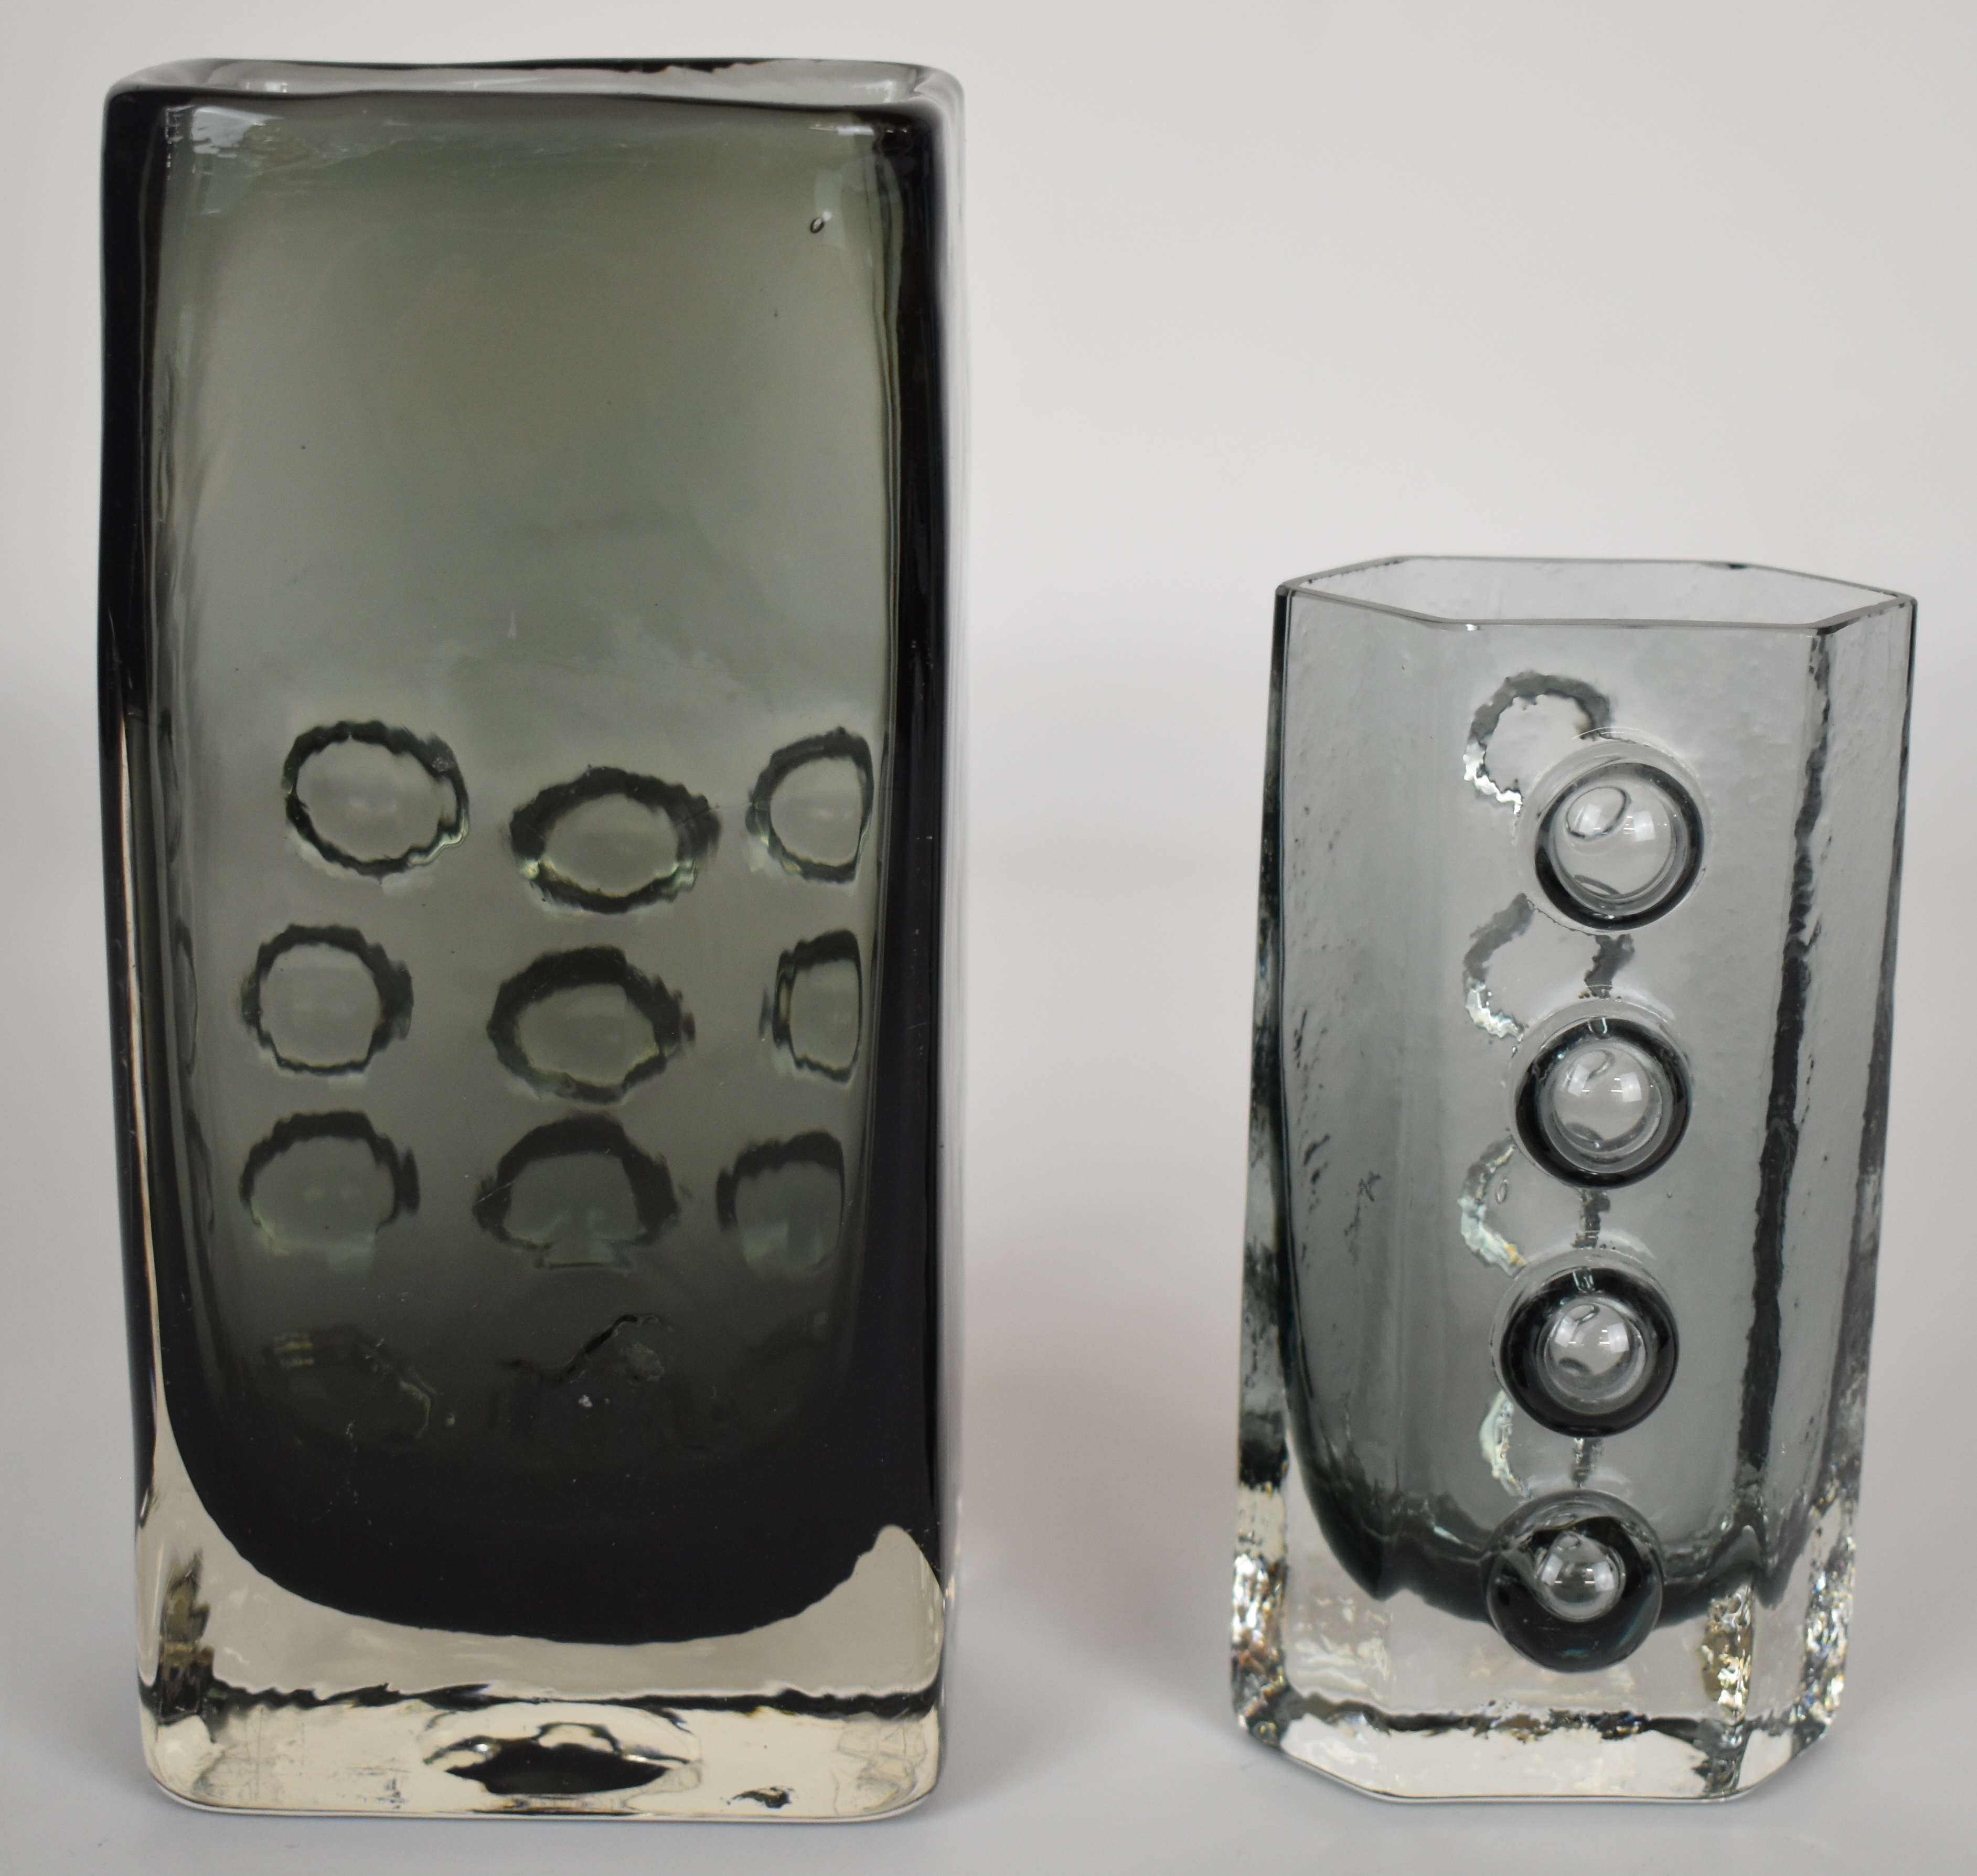 Two Geoffrey Baxter for Whitefriars textured Mobile Phone vases in pewter grey, largest 17cm tall. - Image 2 of 4